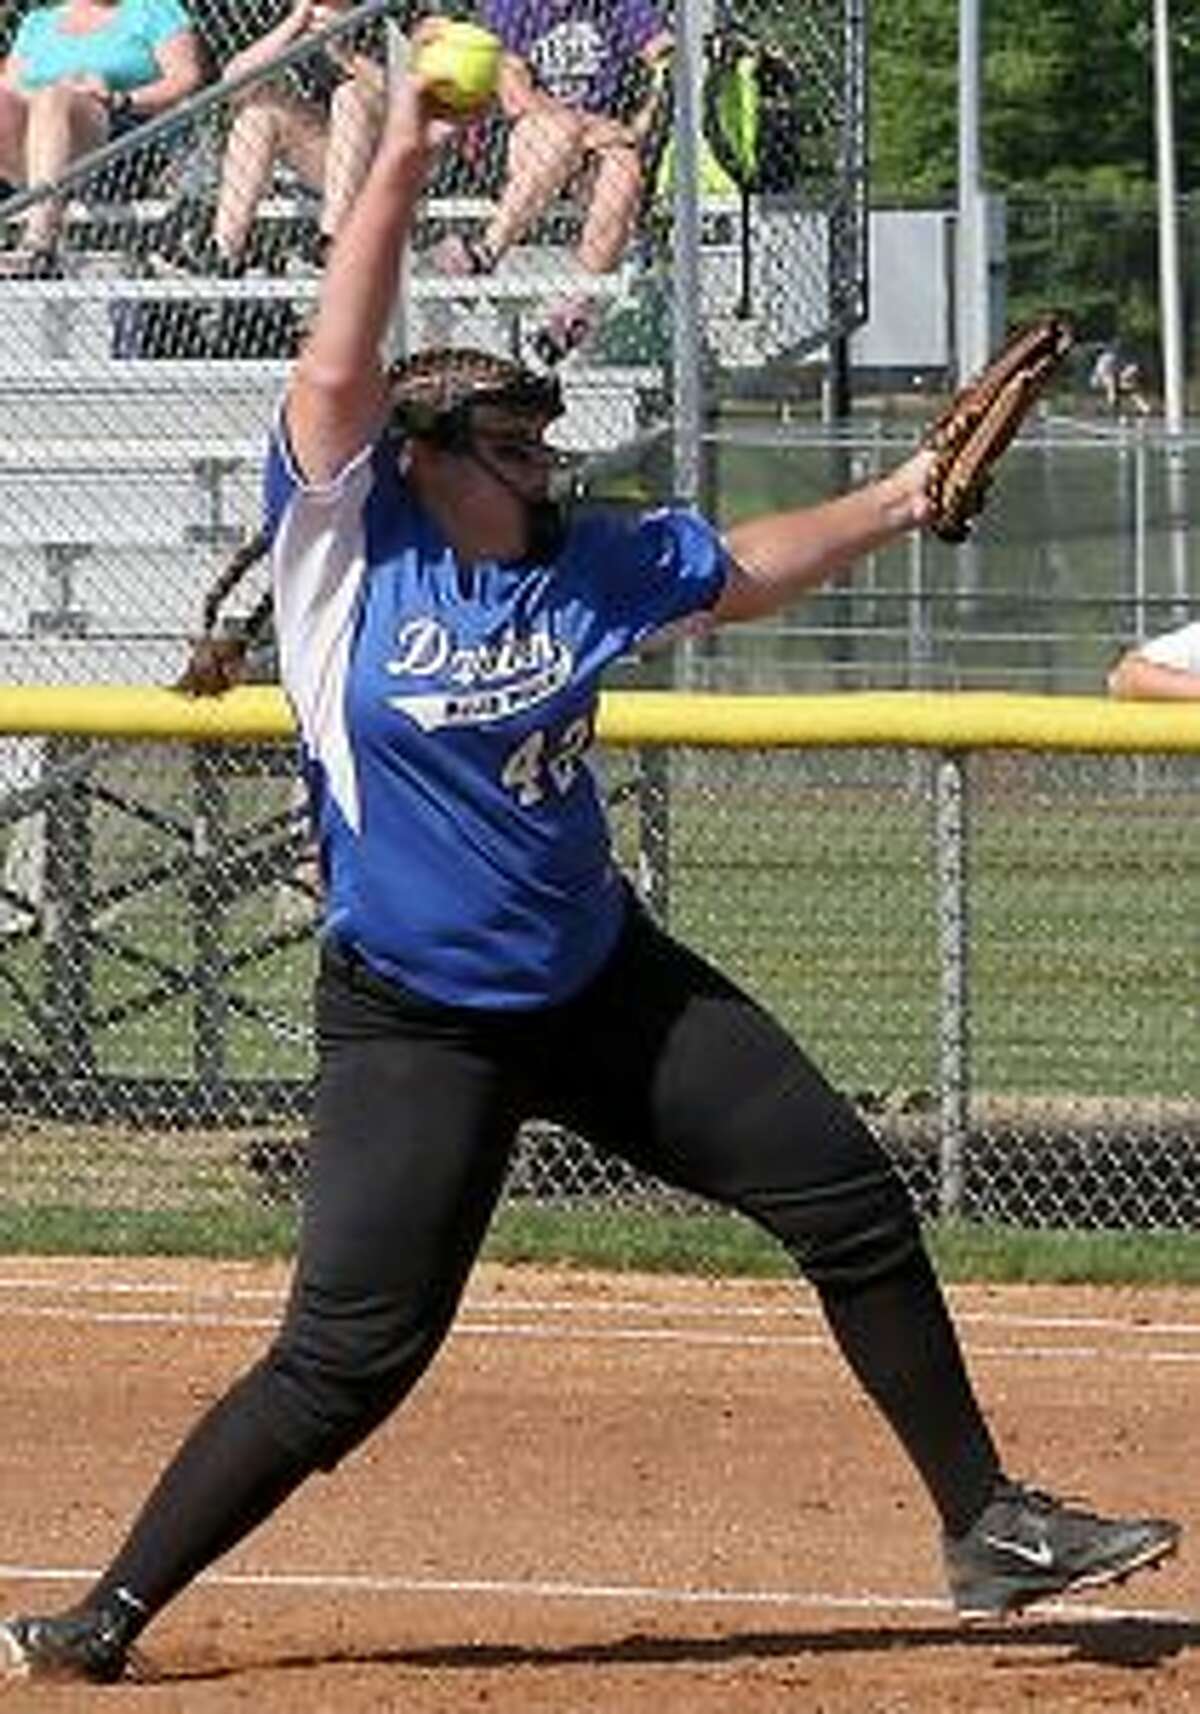 Darien High's Sophie Barbour tossed a two-hitter at Trumbull High. — Bill Bloxsom photos